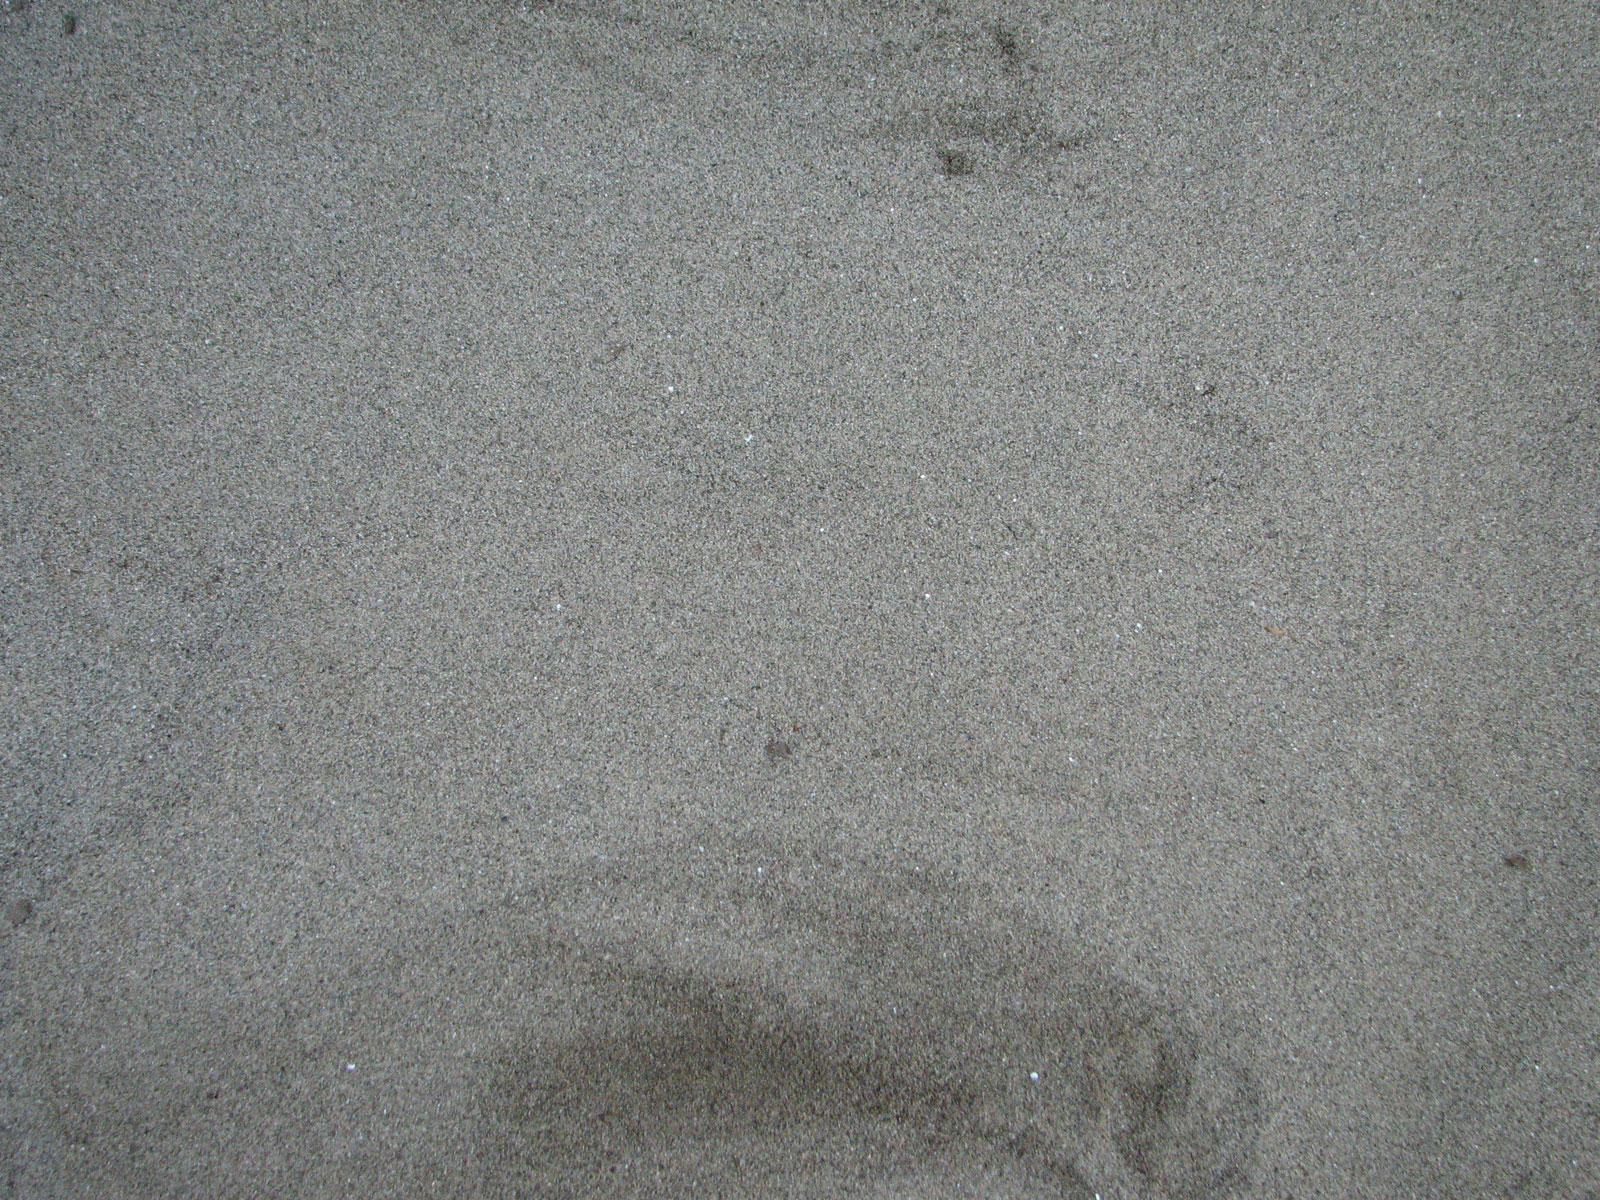 Sand-11 for 1600 x 1200 resolution